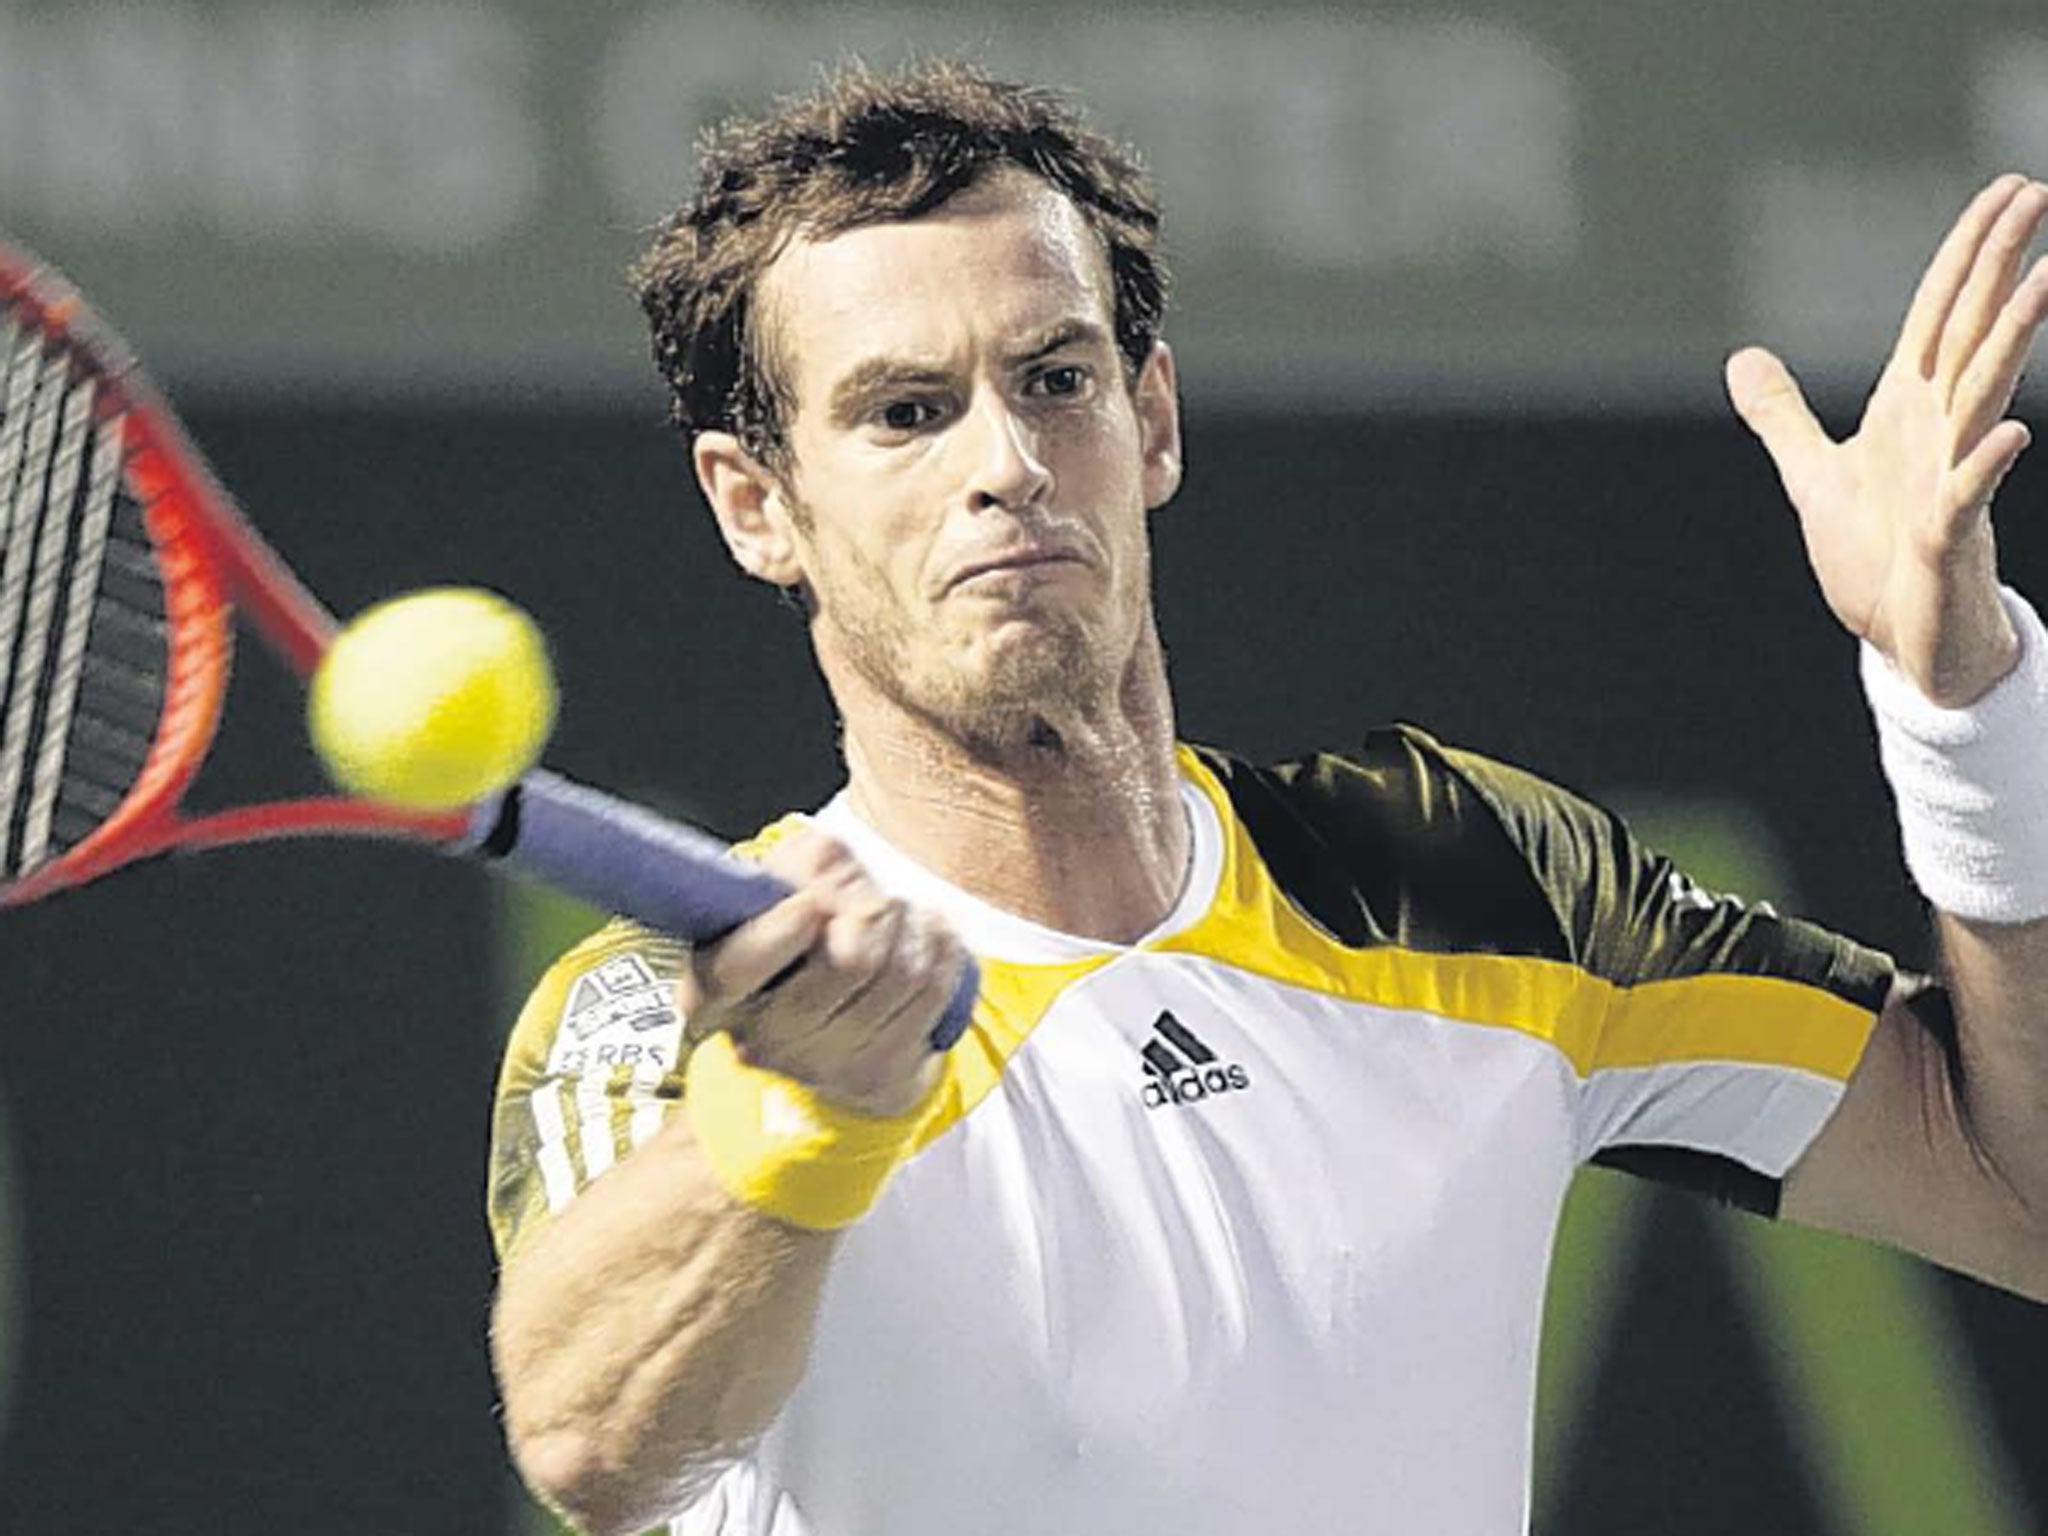 Masters stroke: Andy Murray hits a forehand in the win over Richard Gasquet which put him through to the final